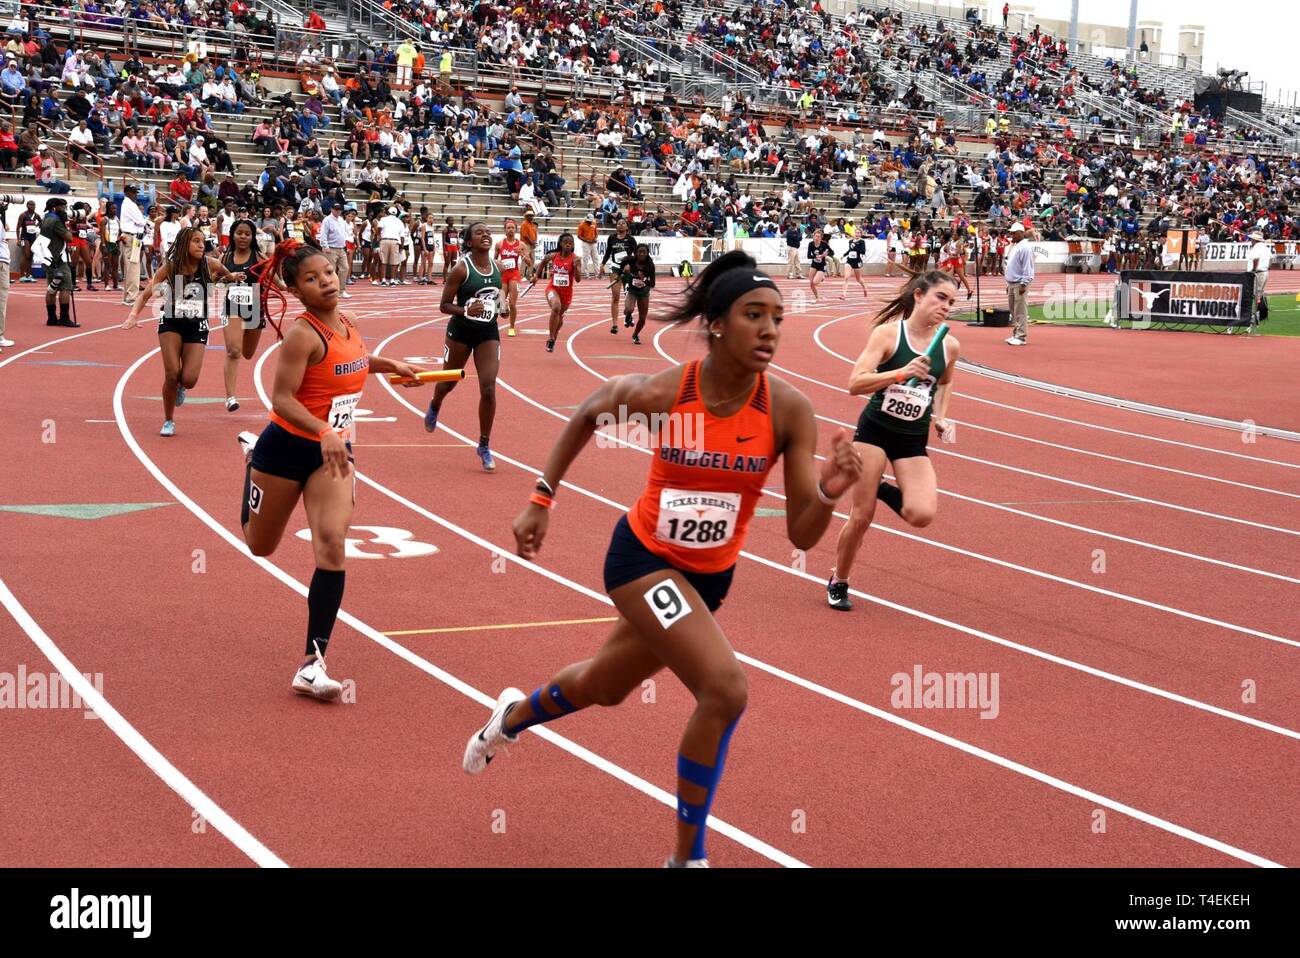 AUSTIN, Texas – (March 29, 2019) Recruiters and Warrior Challenge Mentor Program personnel from Navy Recruiting Districts San Antonio, Dallas, and Houston attended the 92nd Clyde Littlefield Texas Relays held at the Mike A. Myers Stadium on the campus of the University of Texas. The meet, which ran from March 27-30, welcomed more than 7,000 athletes in the high school, collegiate and professional ranks.  The Warrior Challenge Mentor Program is part of a large Navy recruiting effort to identify and develop unique people that are in high demand to serve as technical specialists and dependable te Stock Photo